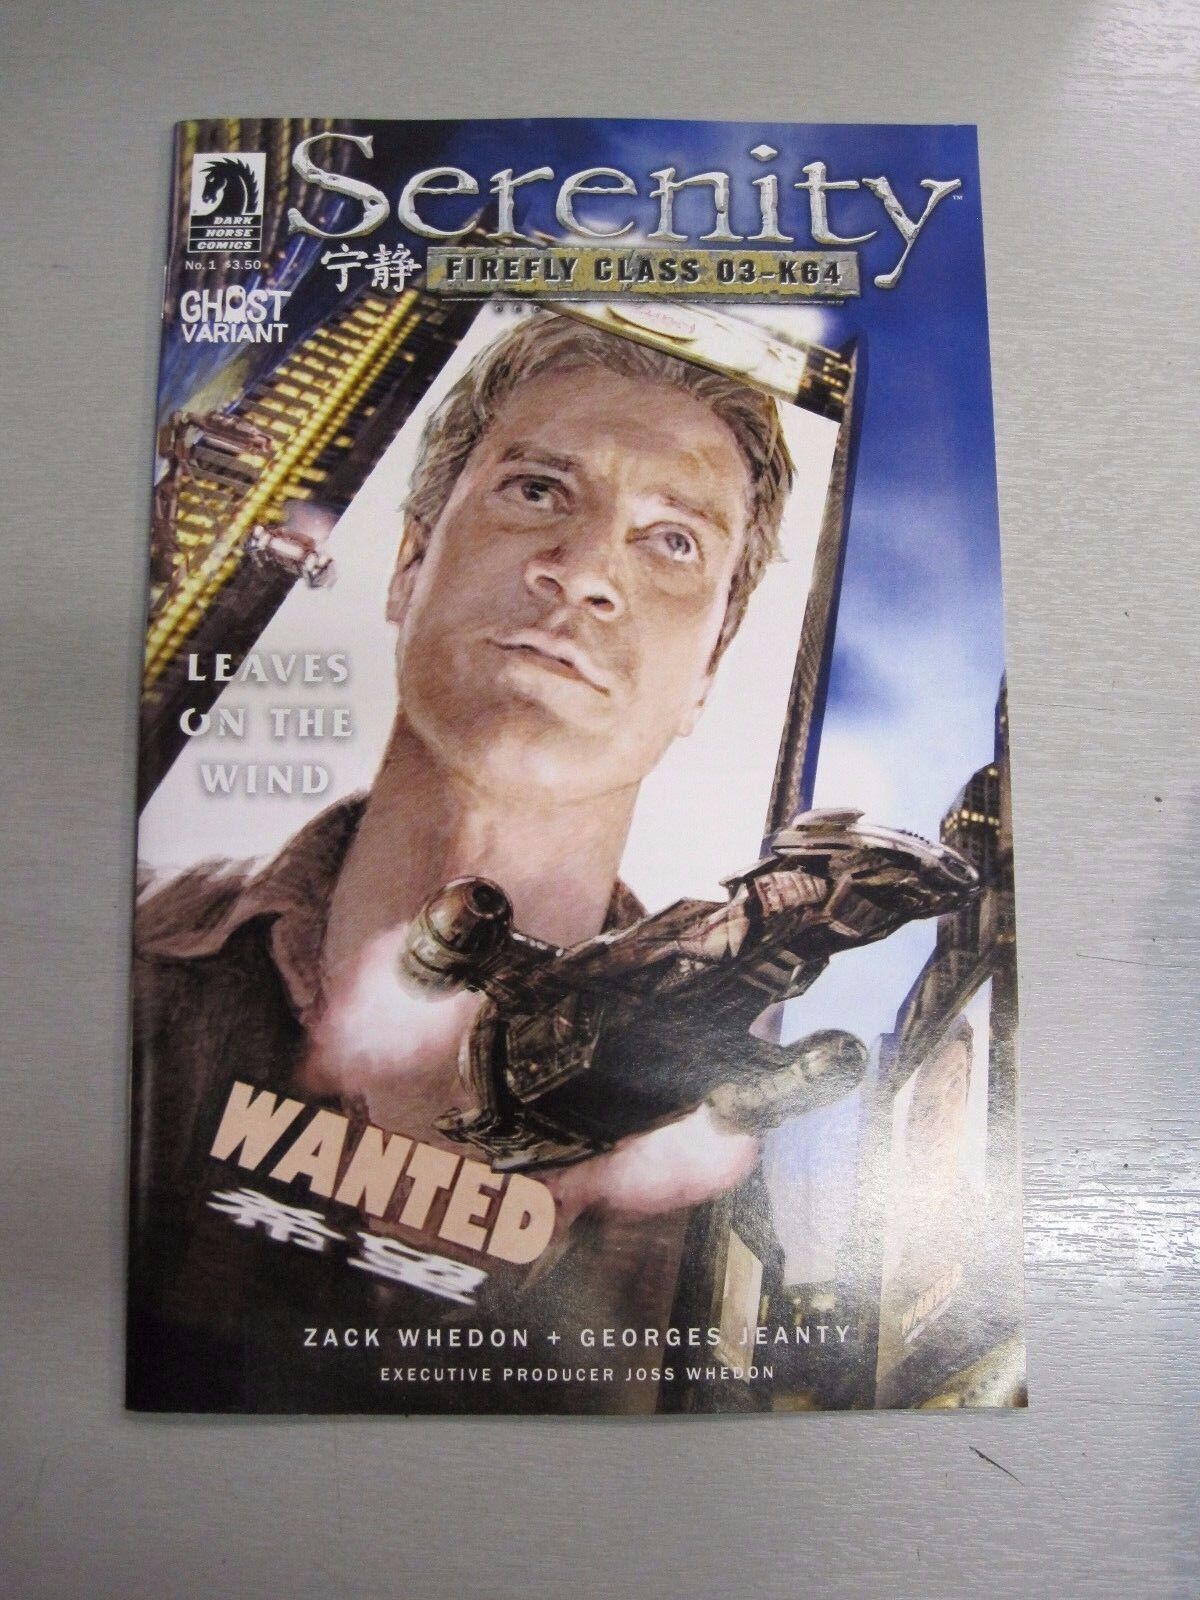 SERENITY LEAVES ON THE WIND #1 GHOST VARIANT